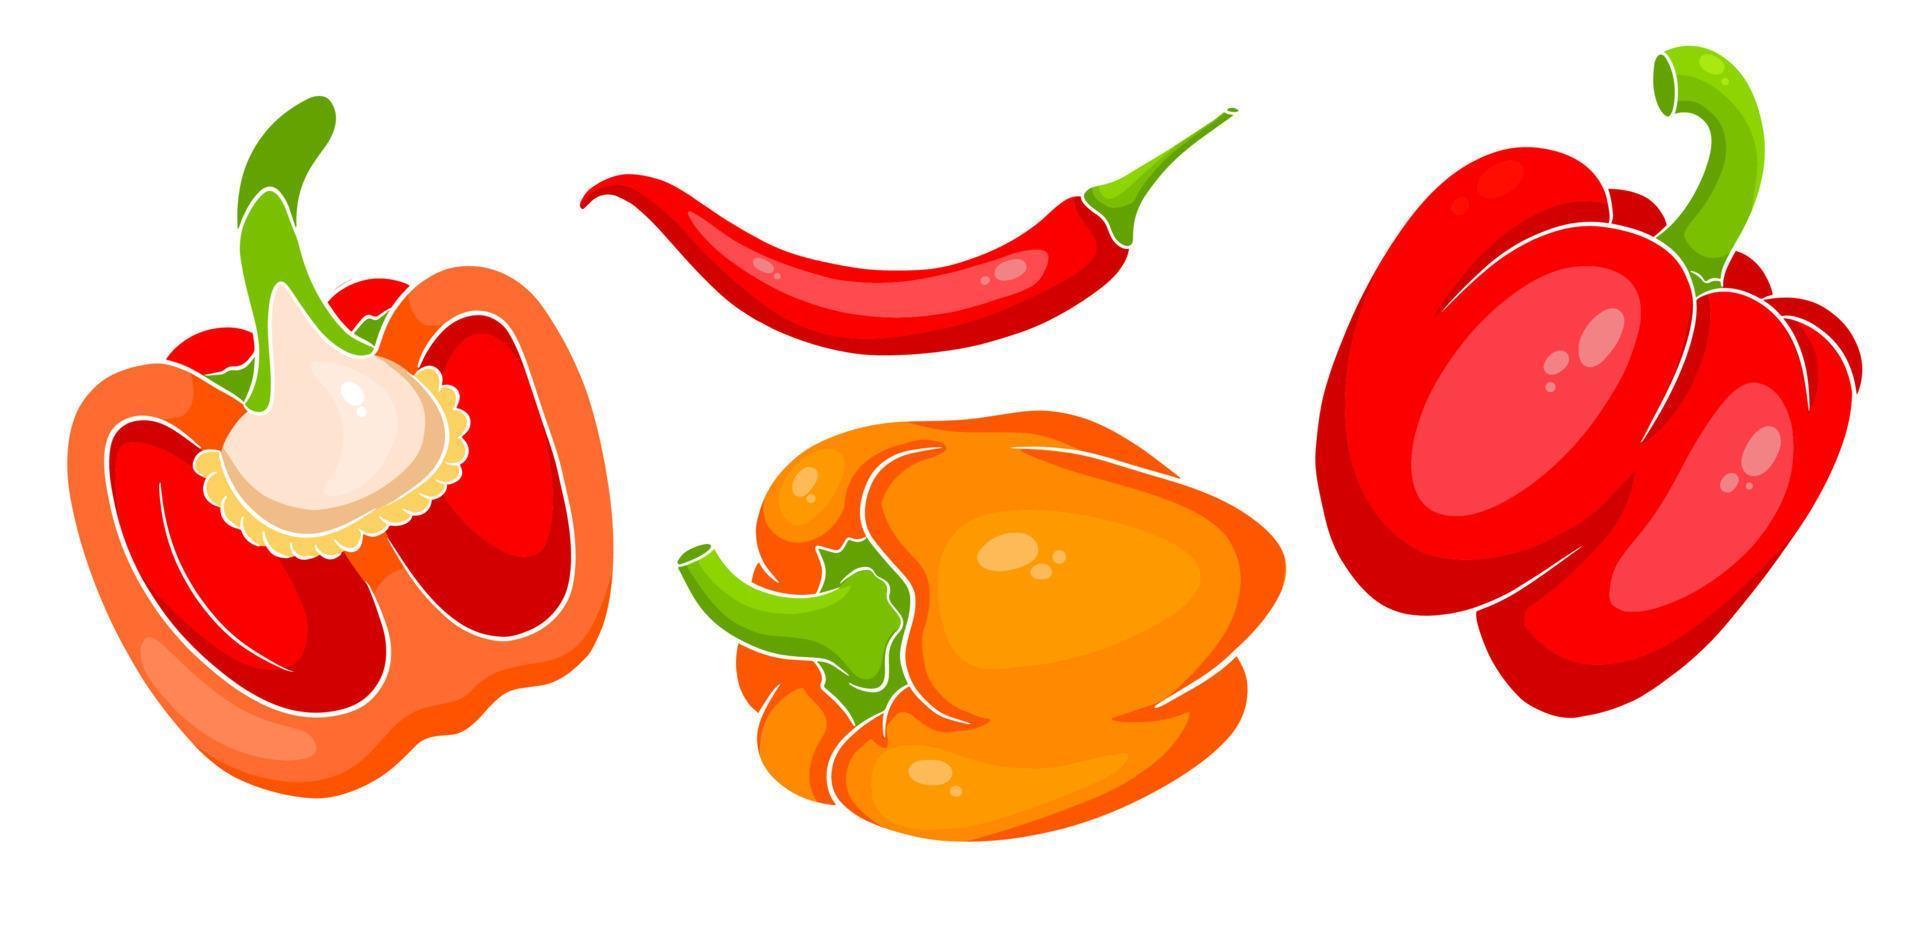 Pepper set. Fresh bell peppers and hot peppers. vector